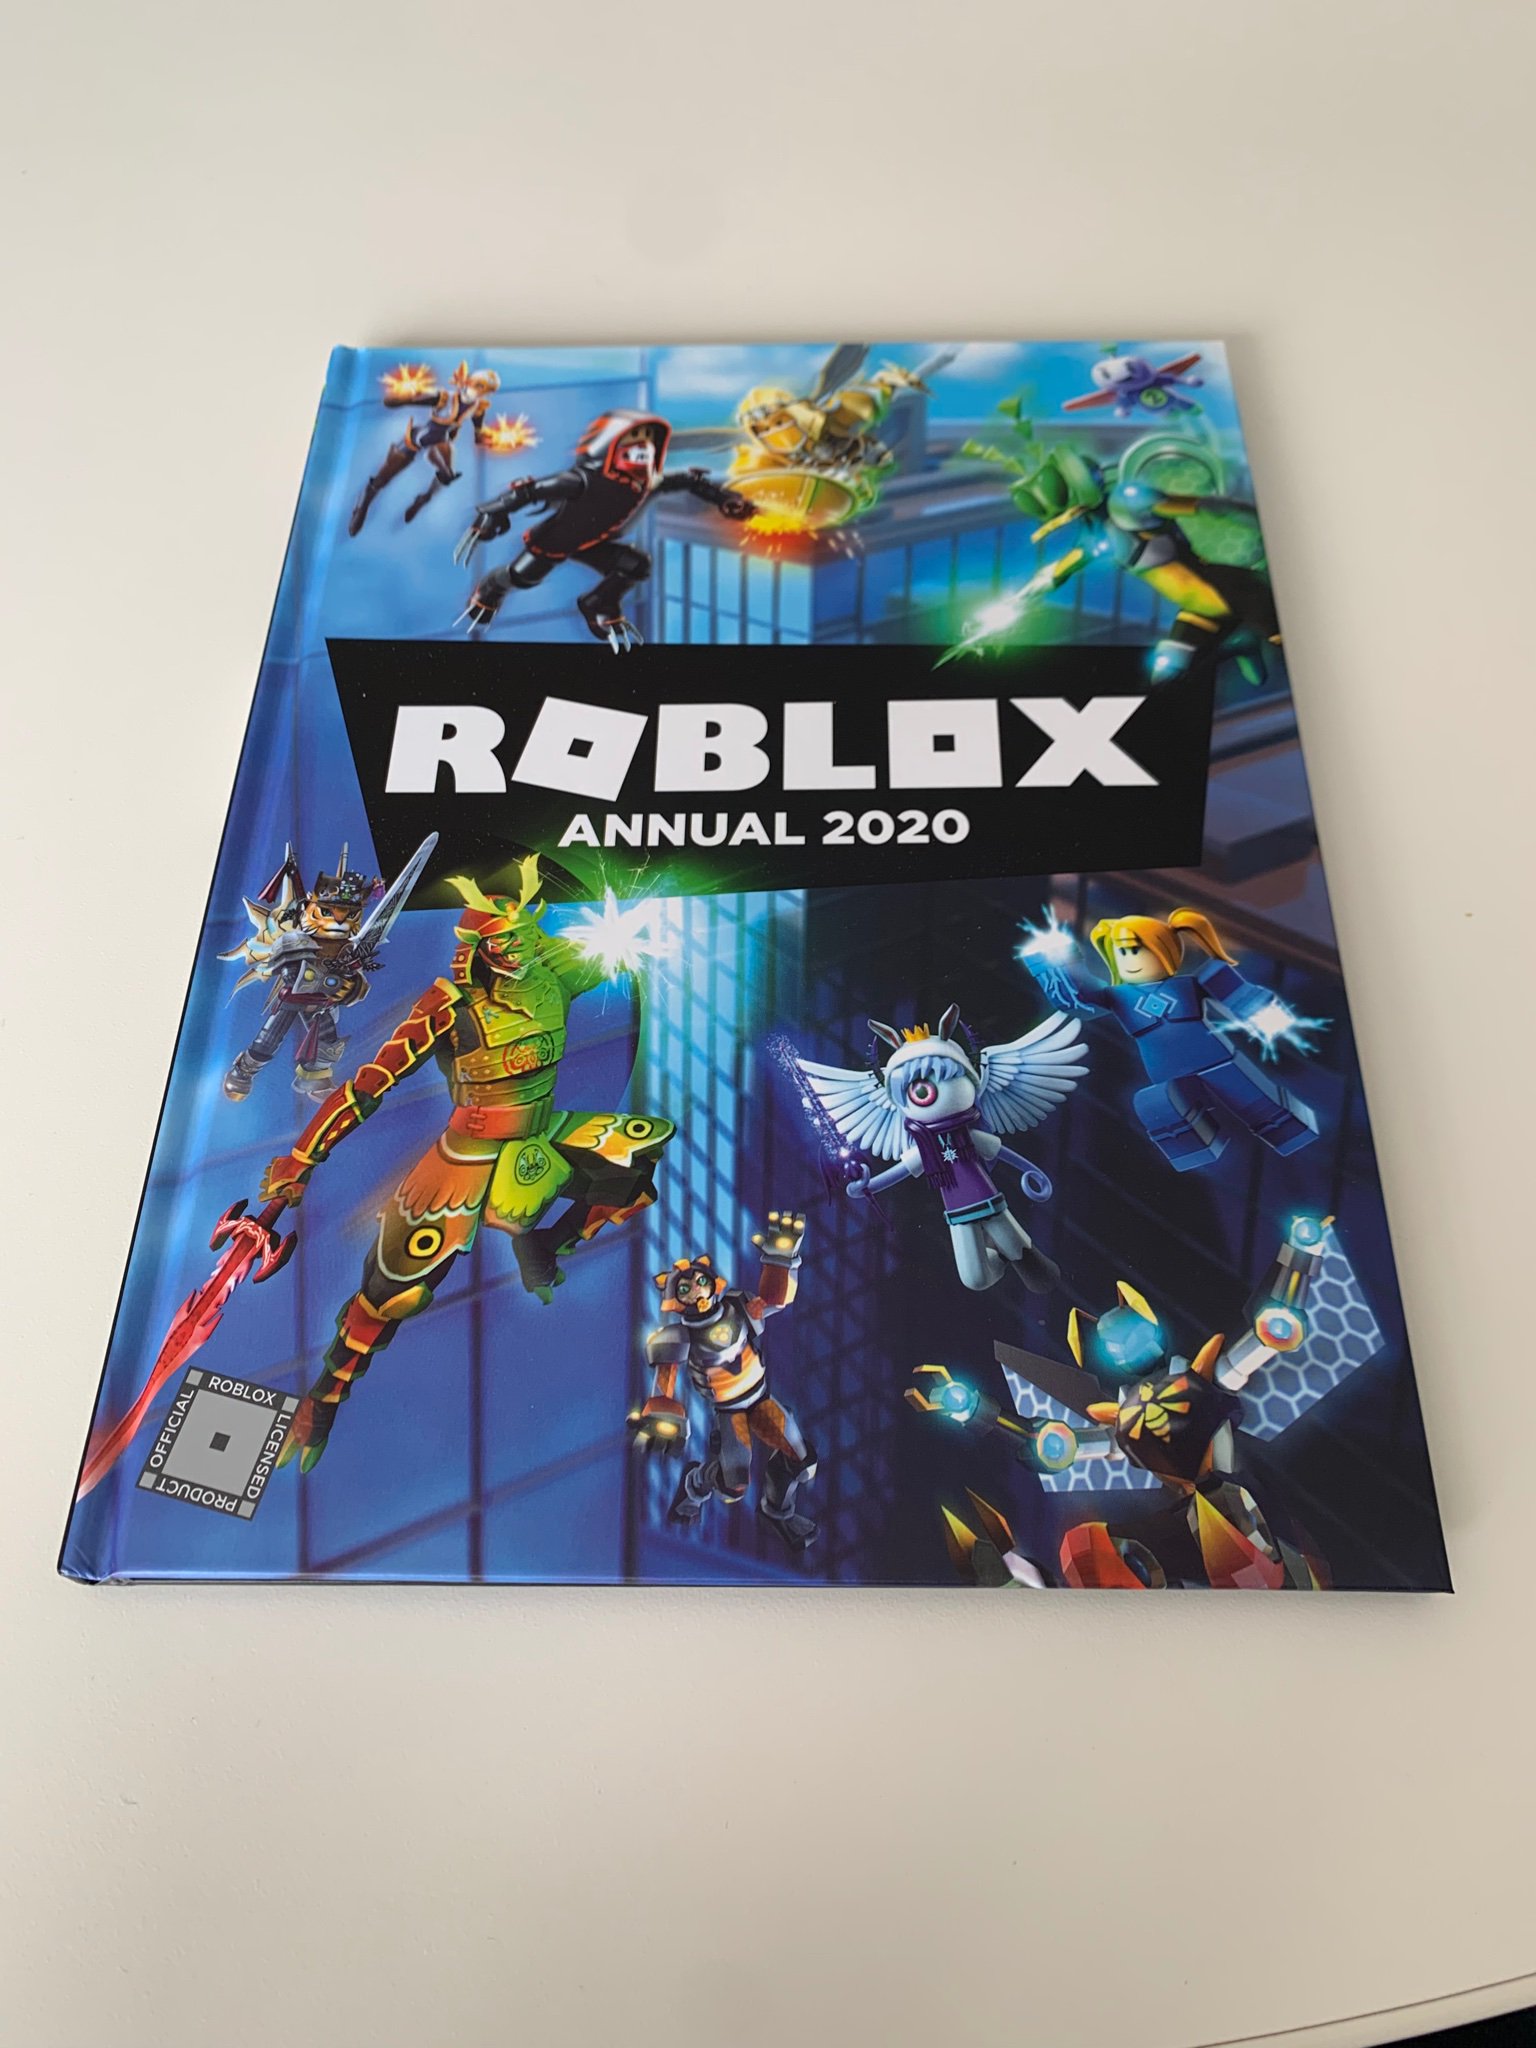 Asimo3089 On Twitter Another Book By Roblox With Jailbreak